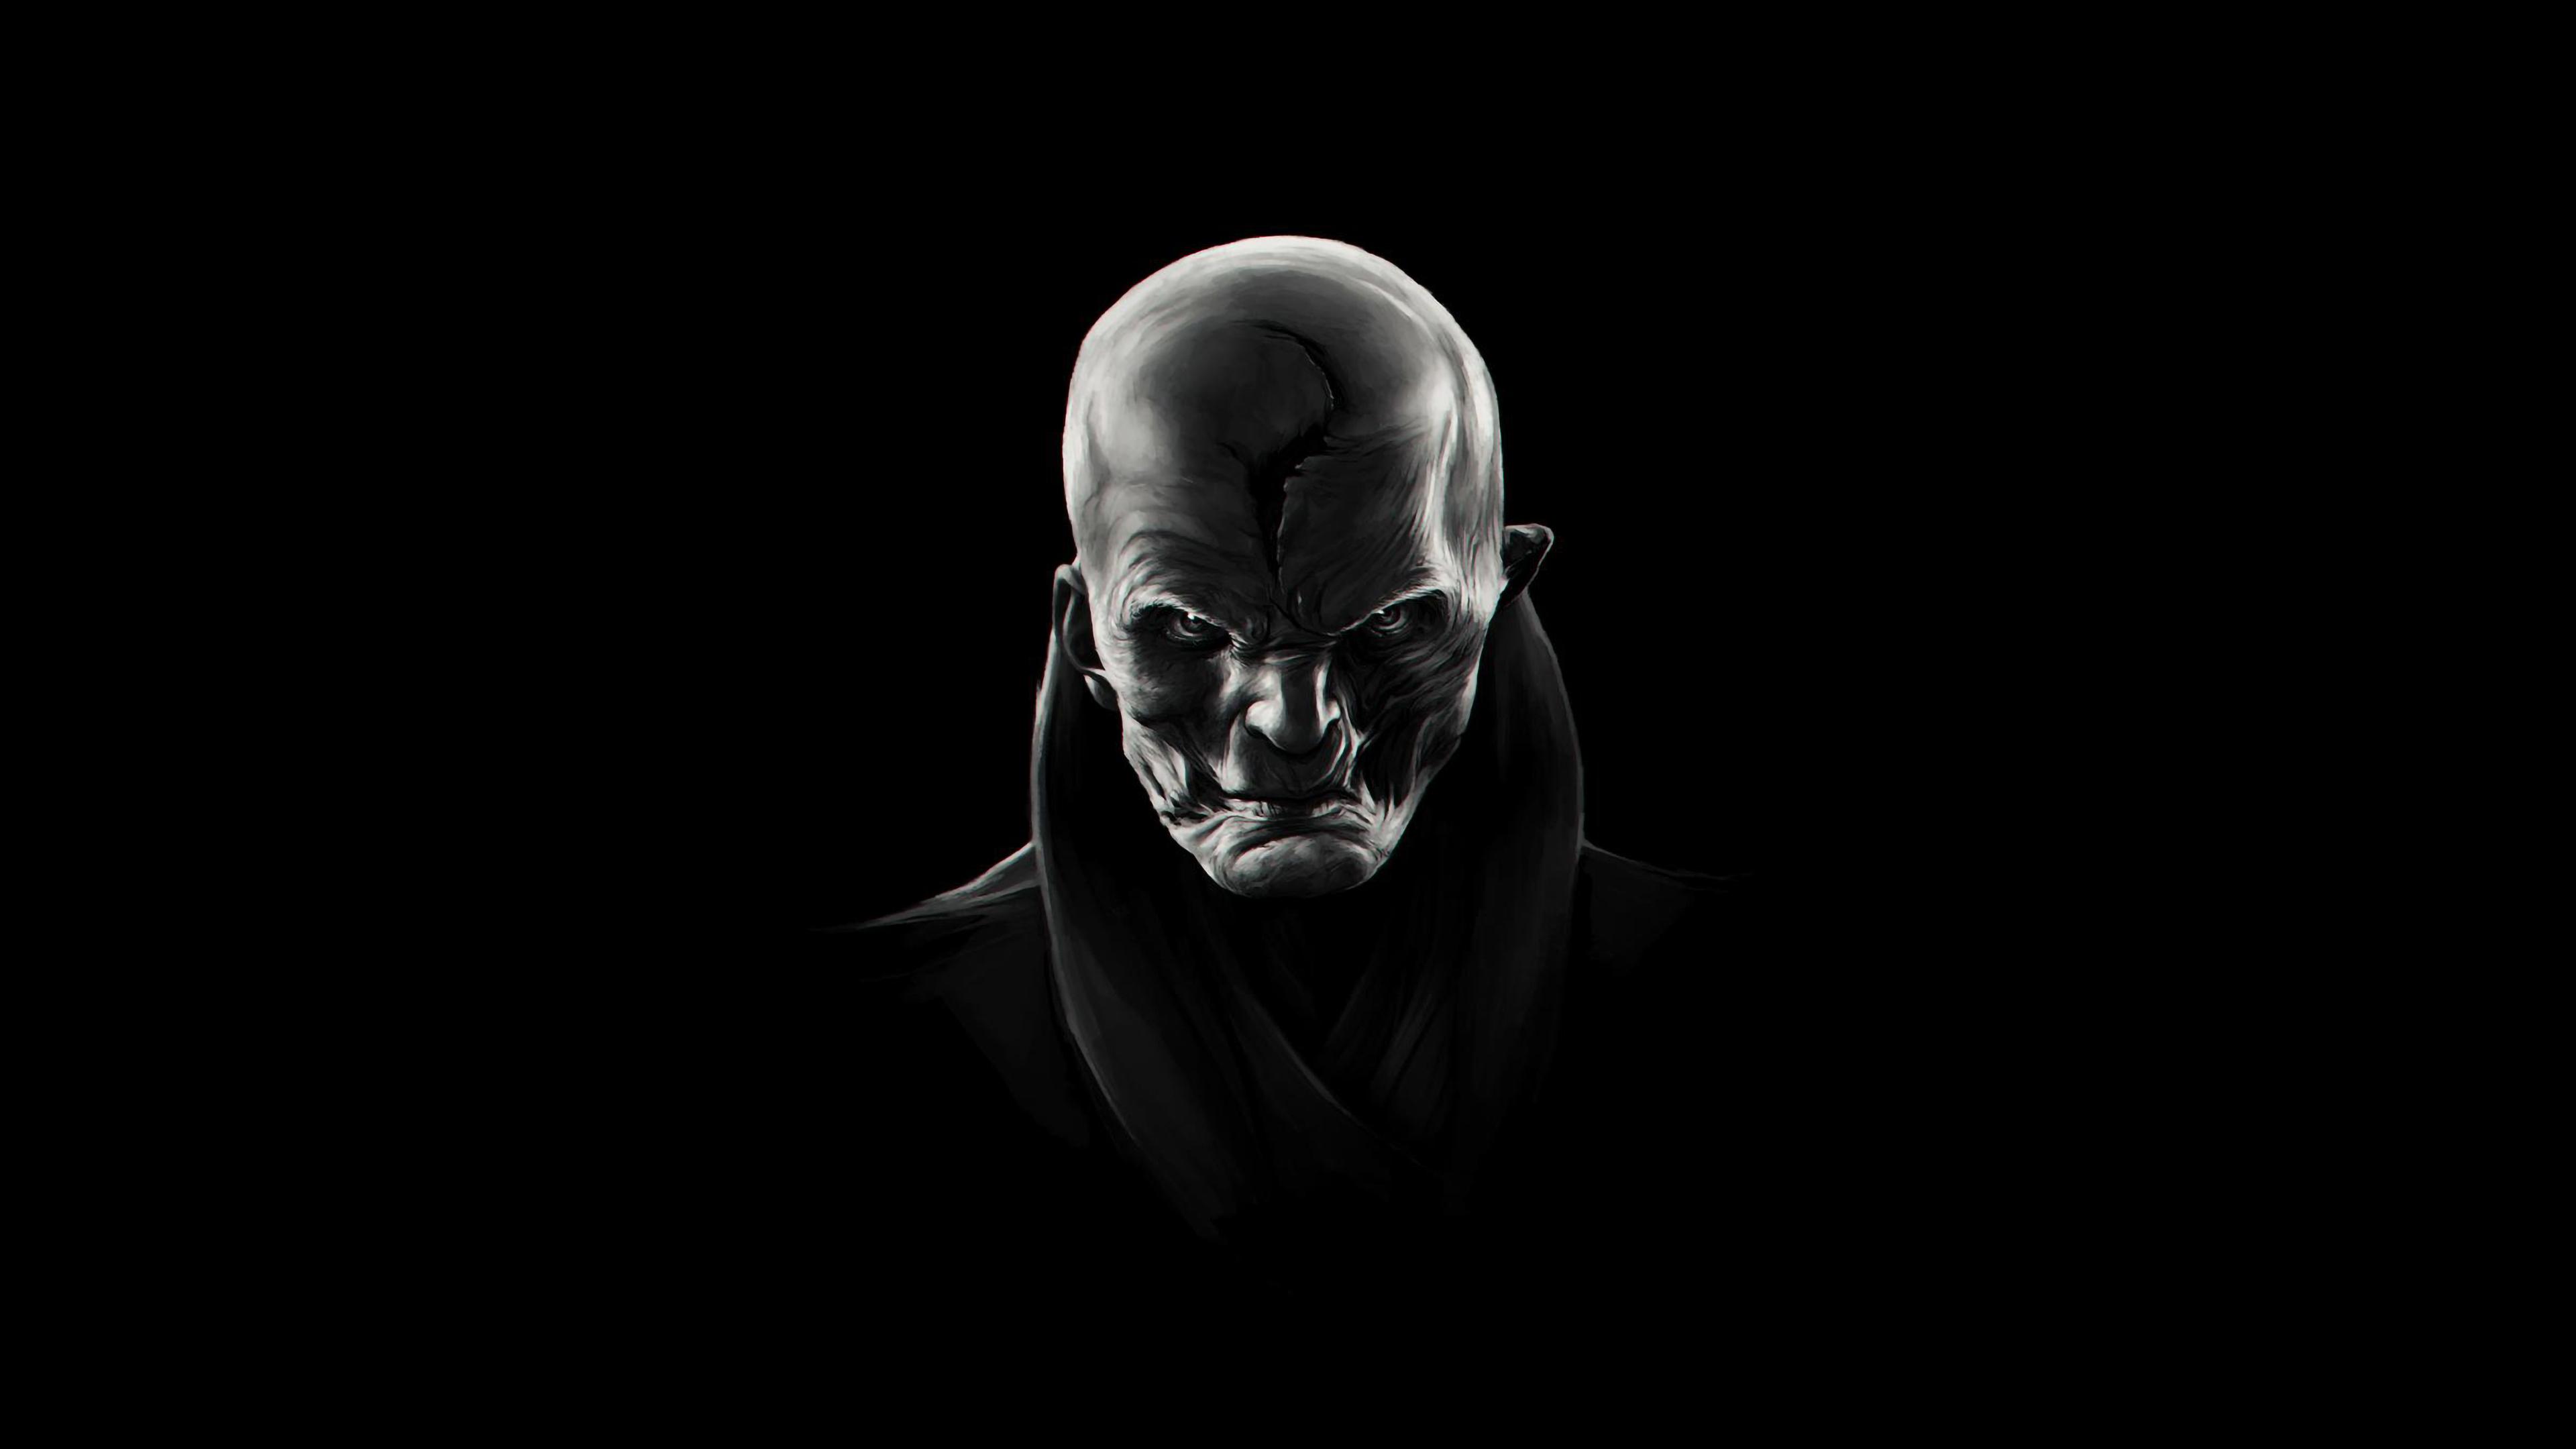 Supreme Leader Snoke Minimalist Android One Wallpaper, HD Movies 4K Wallpaper, Image, Photo and Background